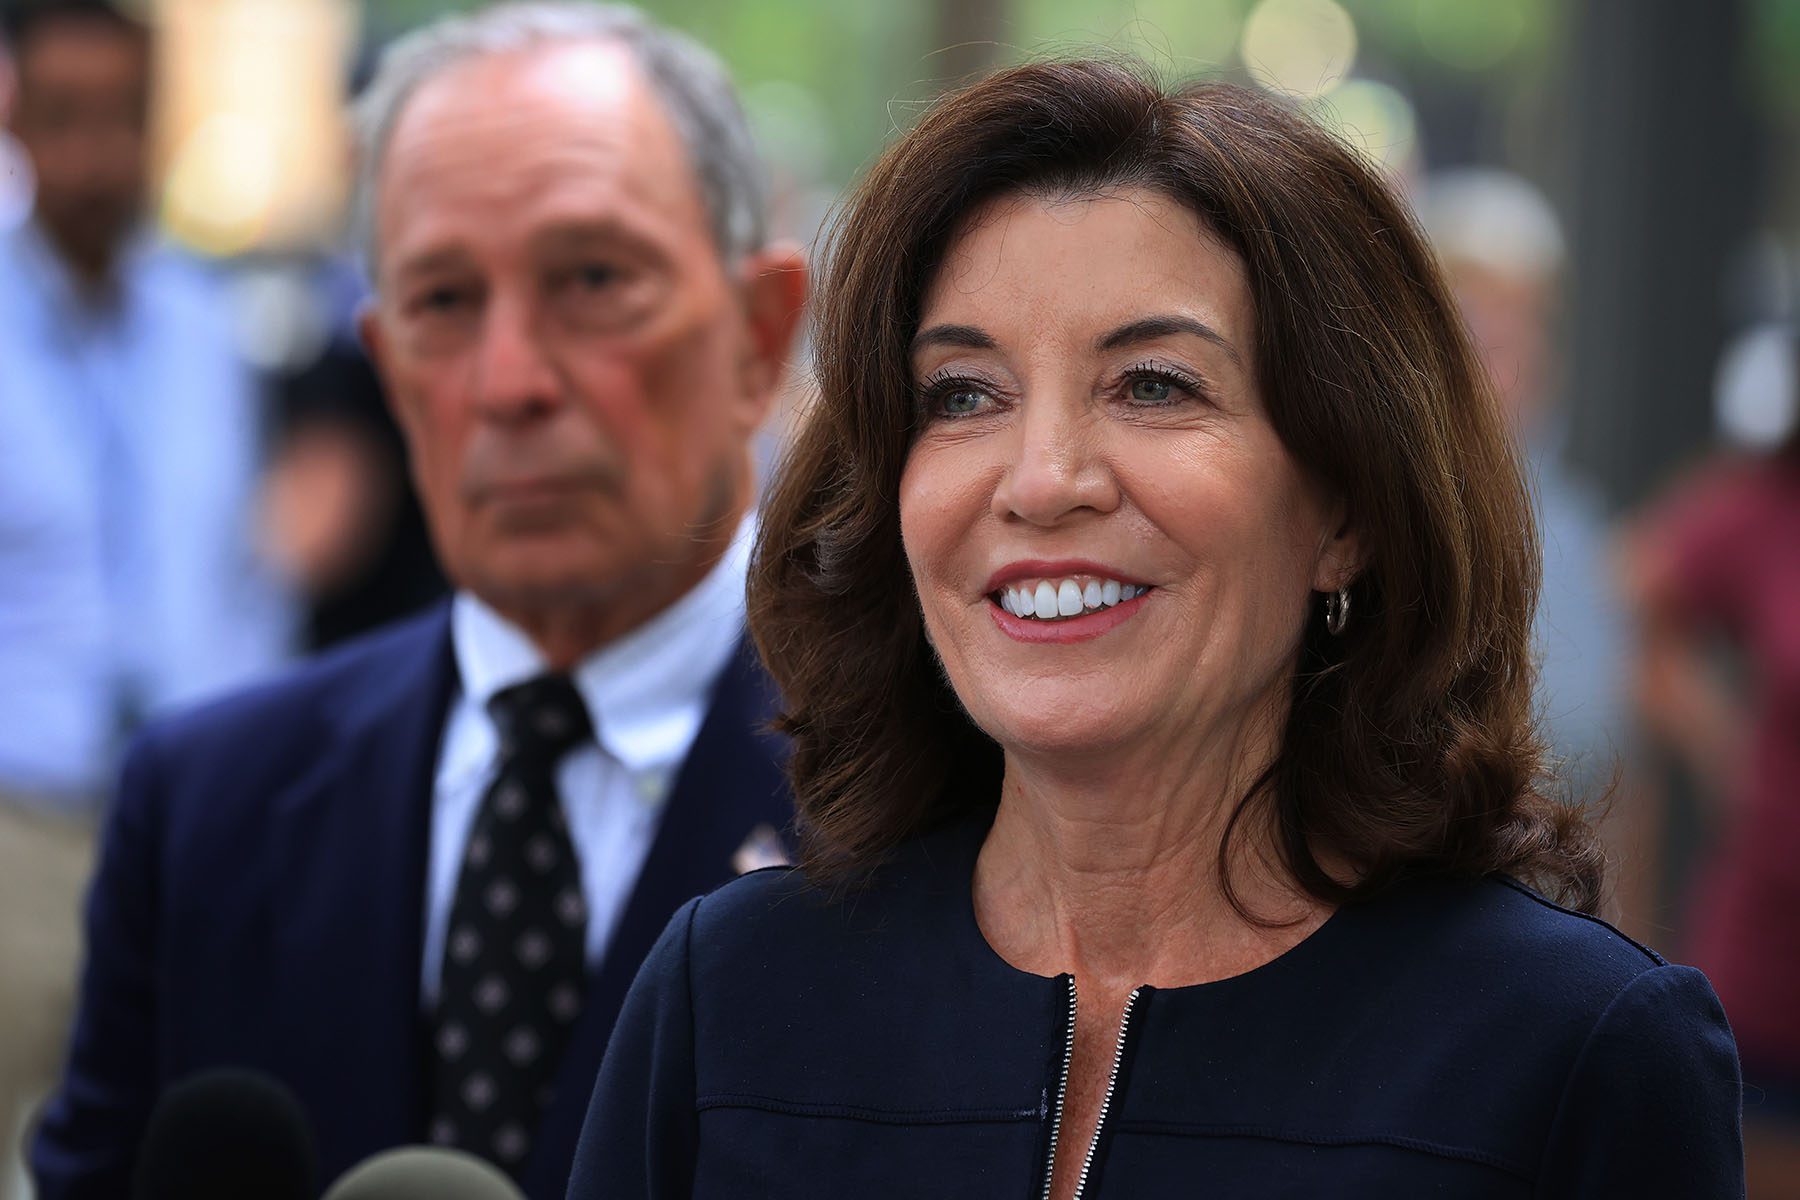 Kathy Hochul talks with reporters. Behind her is former New York City Mayor Mike Bloomberg.